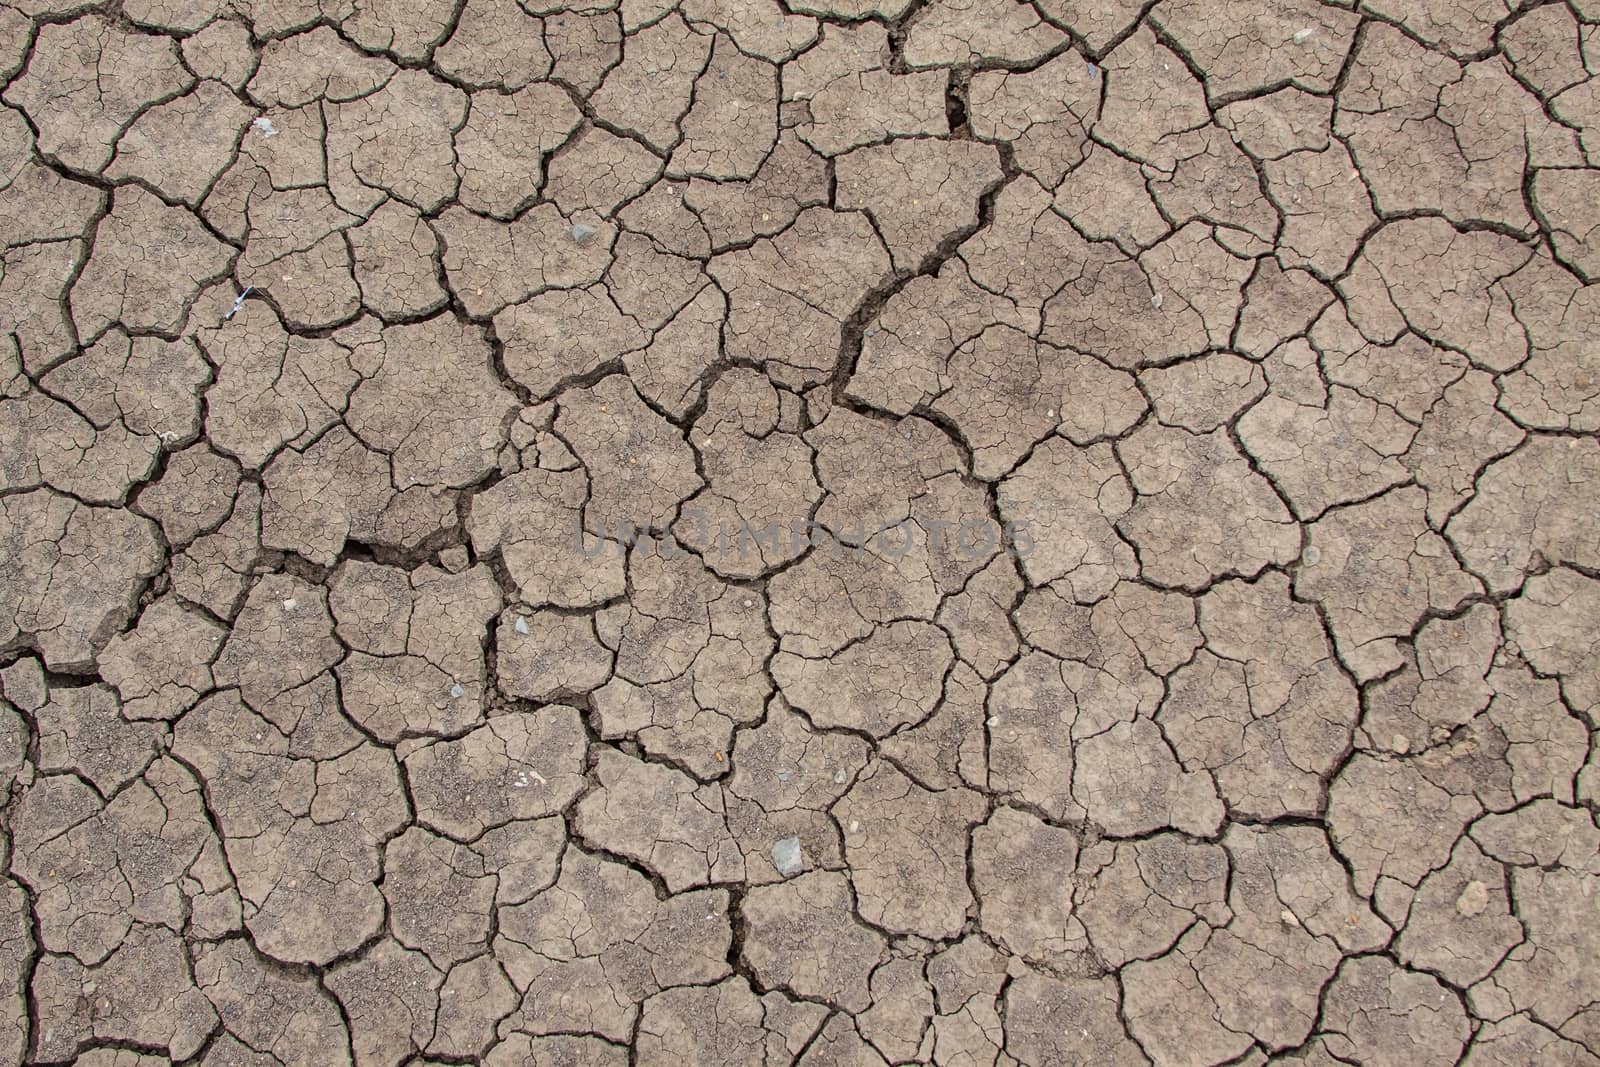 Cracked overlay Distress Dirty Grain background, Texture Soil drought